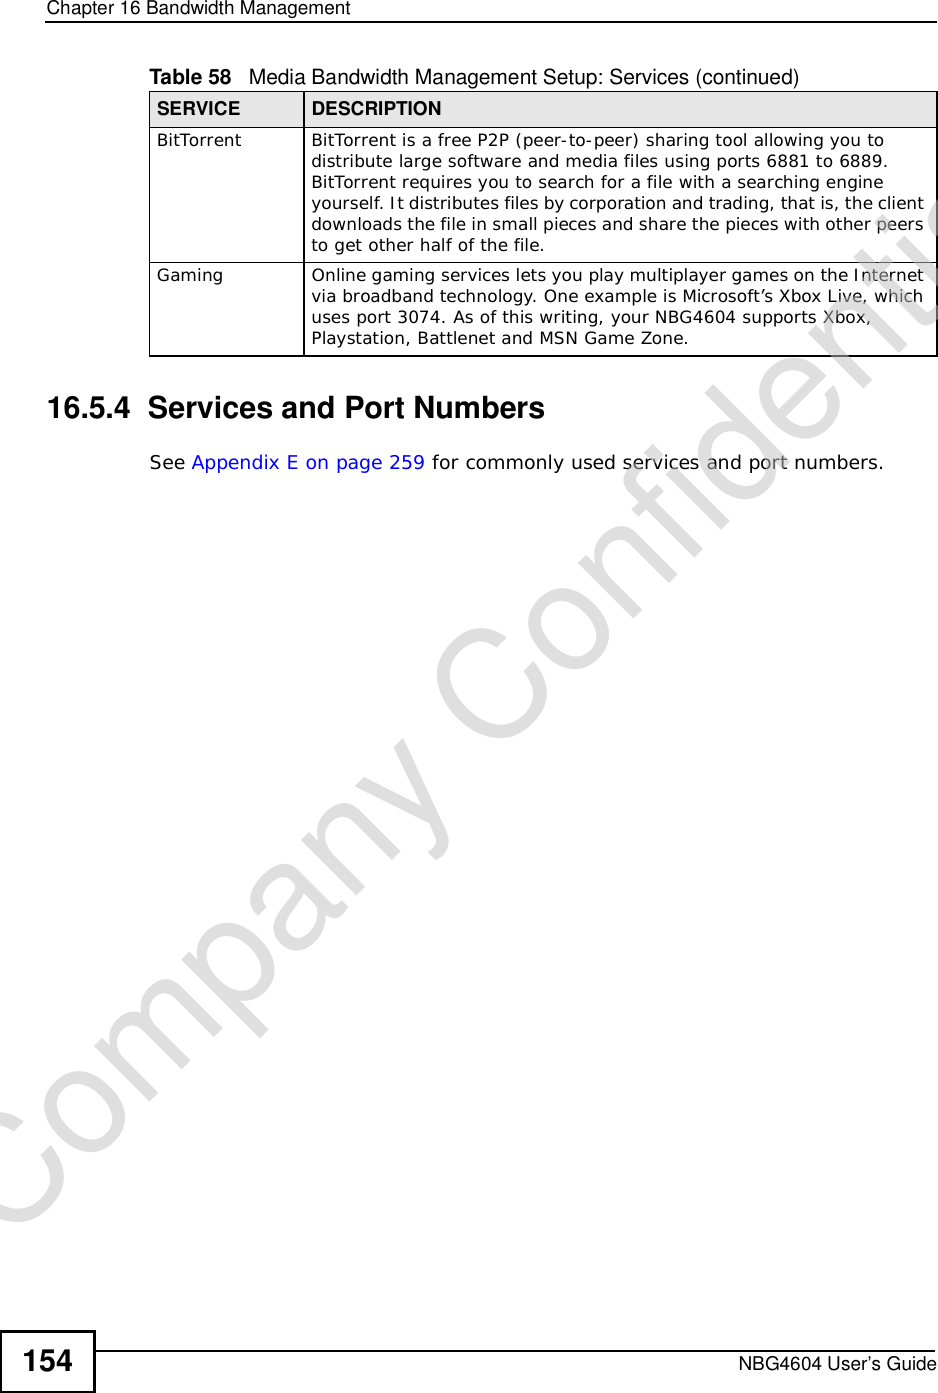 Chapter 16Bandwidth ManagementNBG4604 User’s Guide15416.5.4  Services and Port NumbersSee Appendix E on page 259 for commonly used services and port numbers.BitTorrentBitTorrent is a free P2P (peer-to-peer) sharing tool allowing you to distribute large software and media files using ports 6881 to 6889. BitTorrent requires you to search for a file with a searching engine yourself. It distributes files by corporation and trading, that is, the client downloads the file in small pieces and share the pieces with other peers to get other half of the file.GamingOnline gaming services lets you play multiplayer games on the Internet via broadband technology. One example is Microsoft’s Xbox Live, which uses port 3074. As of this writing, your NBG4604 supports Xbox, Playstation, Battlenet and MSN Game Zone.Table 58   Media Bandwidth Management Setup: Services (continued)SERVICE DESCRIPTIONCompany Confidential